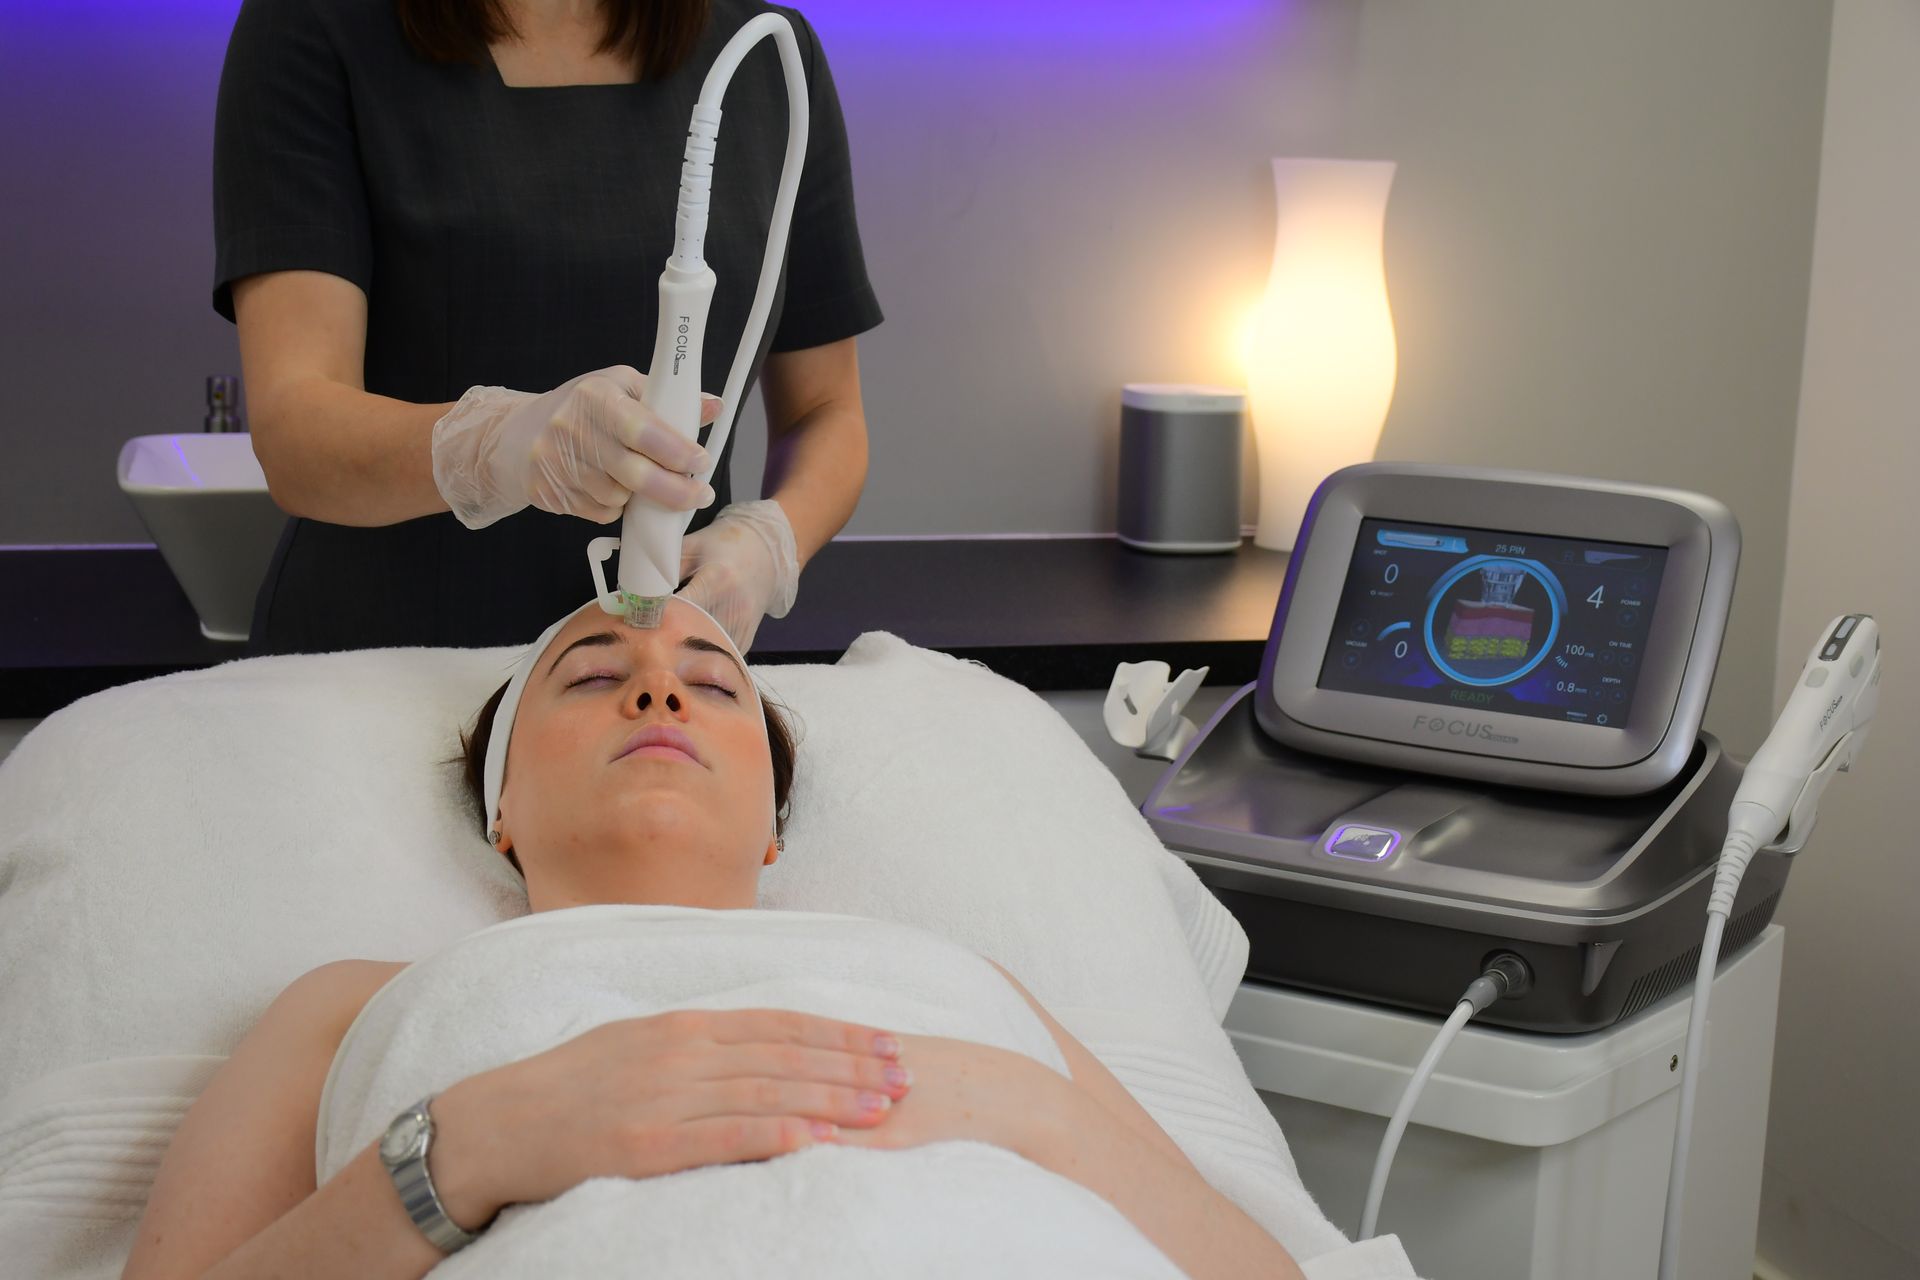 Radiofrequency Microneedling treatment being performed